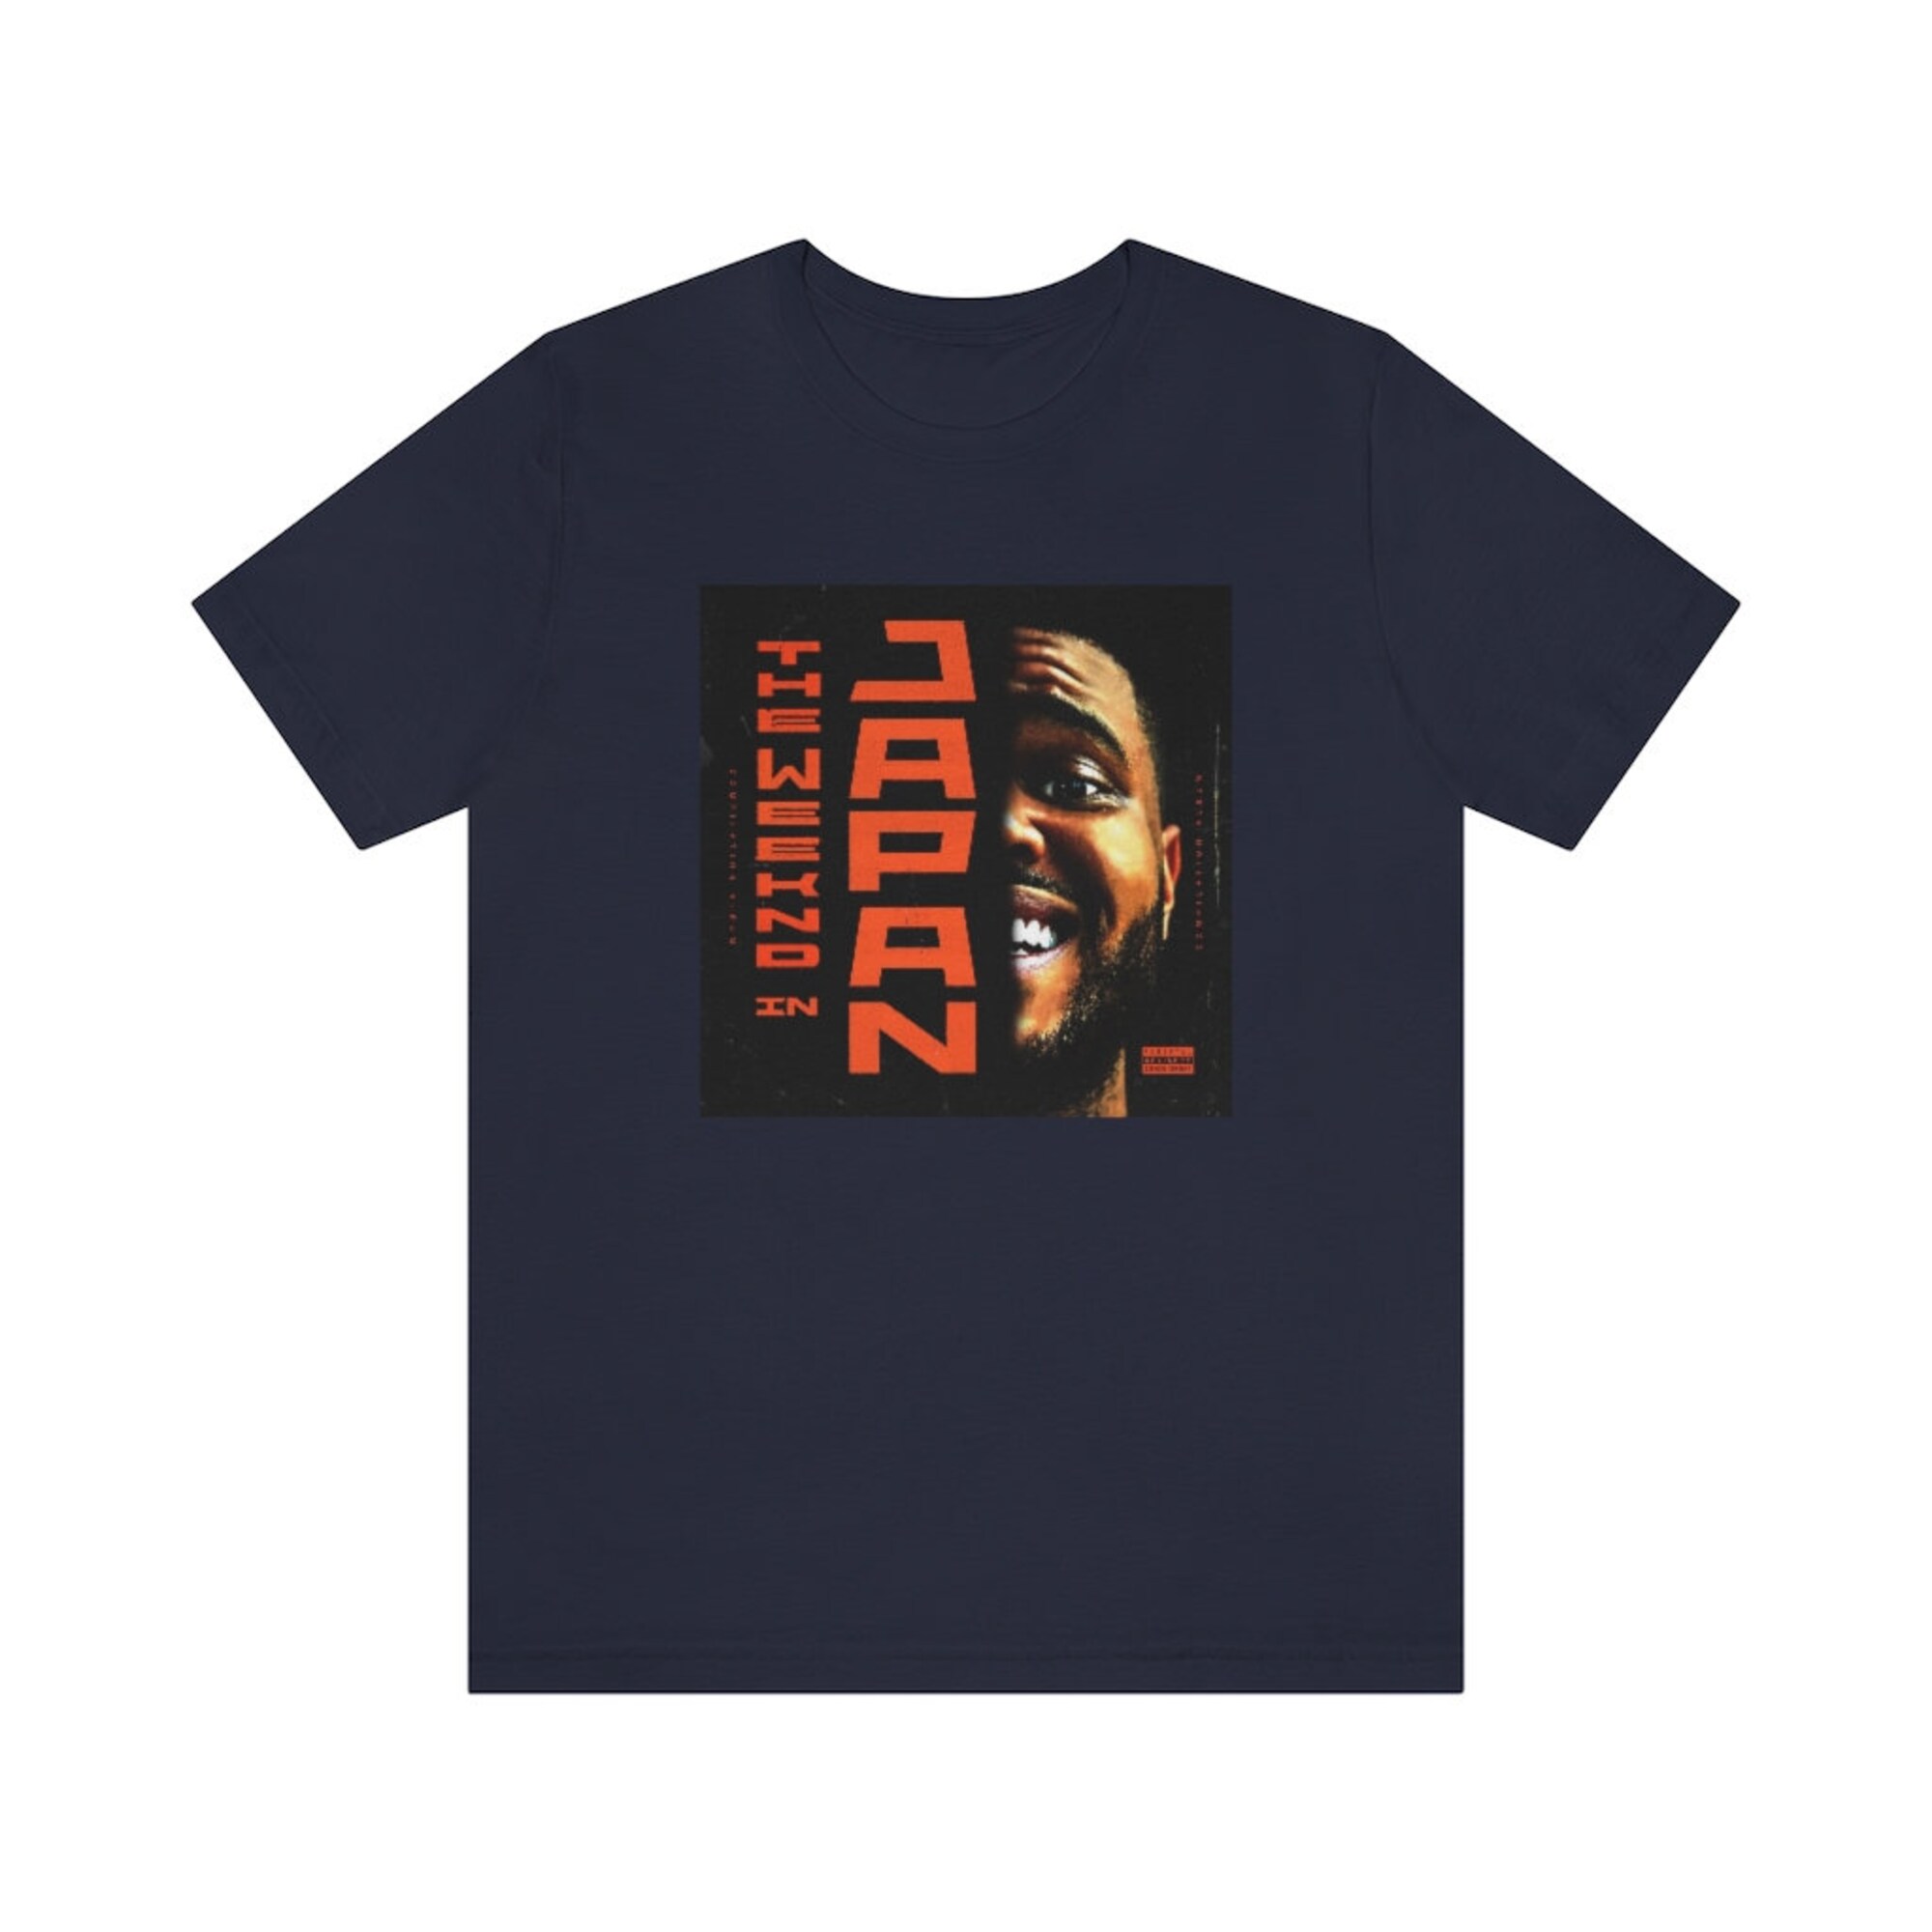 Discover The Weeknd - The Weeknd in Japan / Unisex Premium T-Shirt